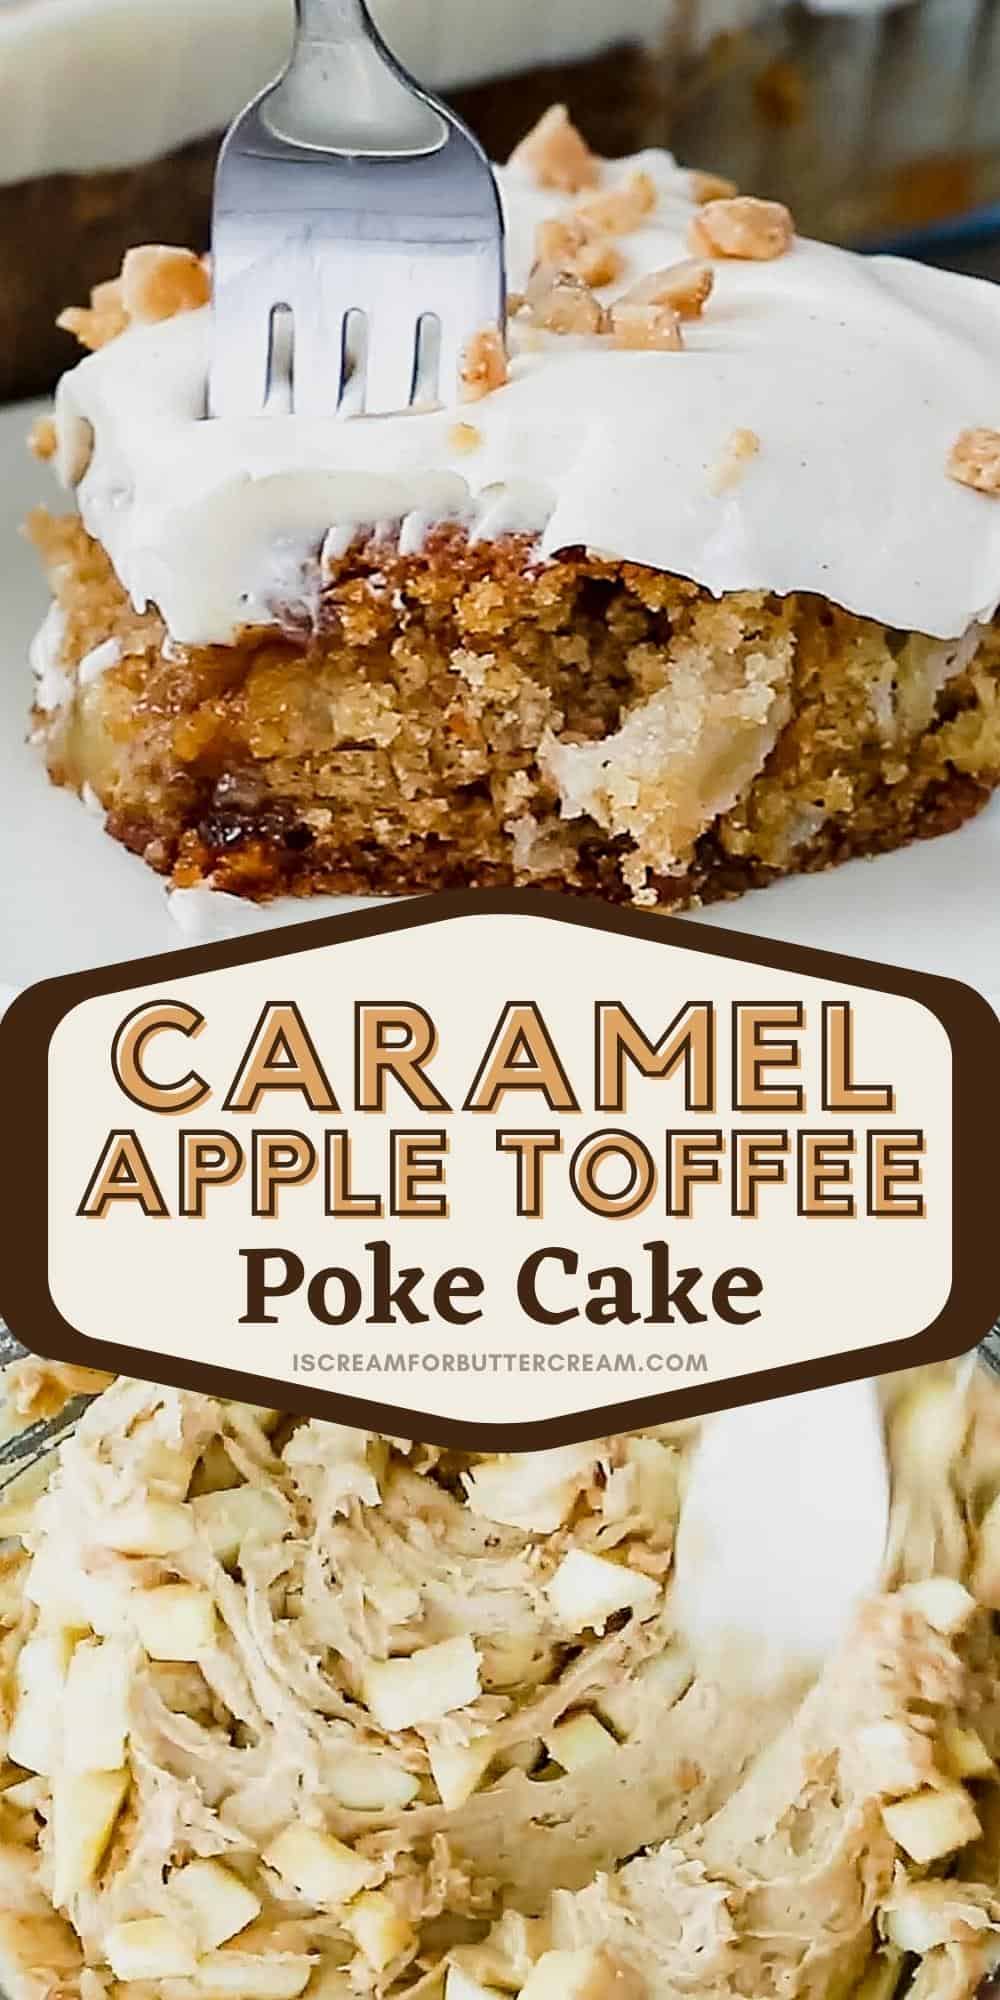 Pin graphic with apple toffee cake and text overlay.